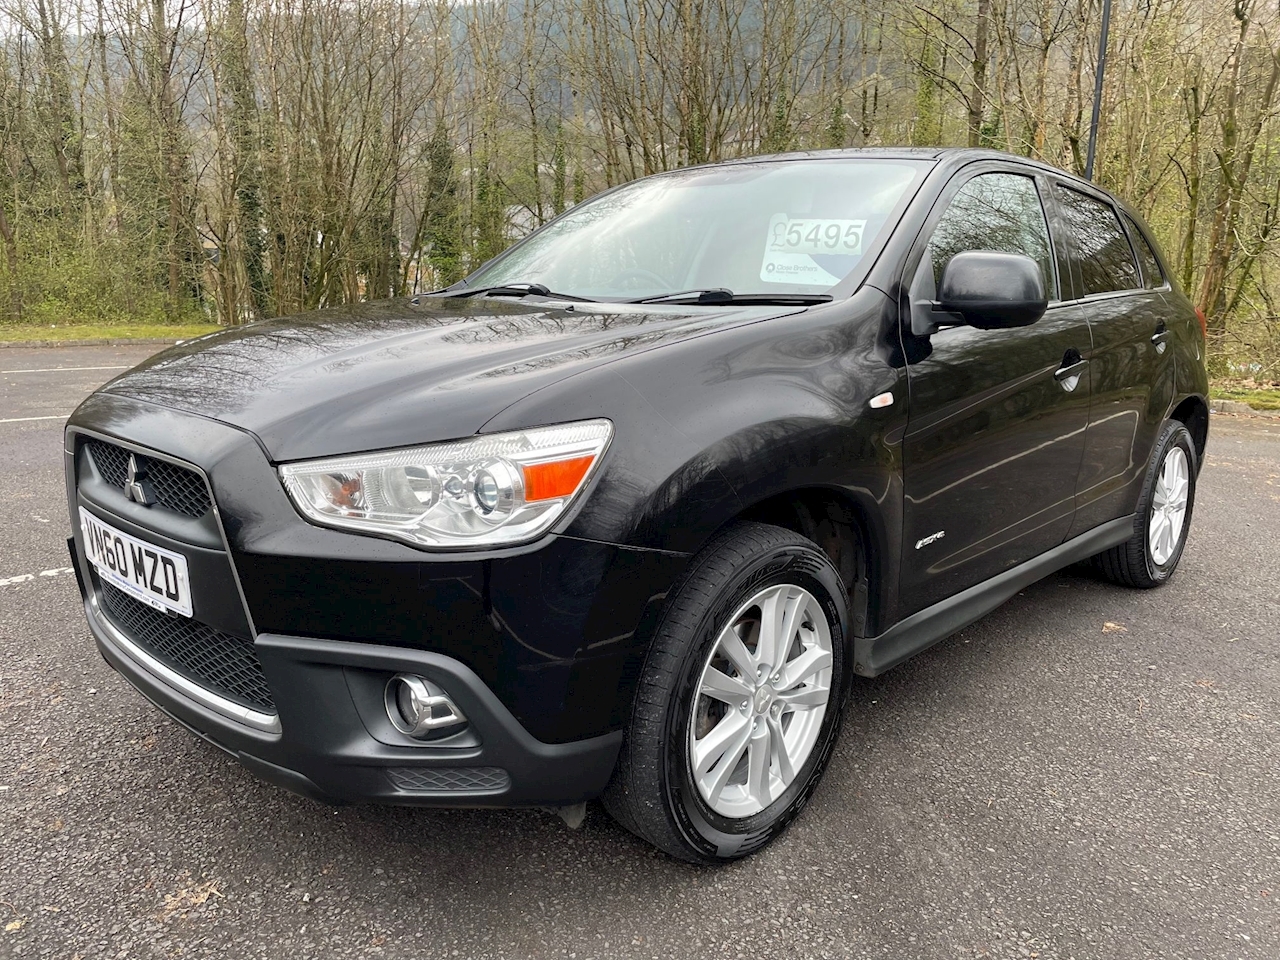 1.8D ClearTec 4 SUV 5dr Diesel Manual 4WD (150 g/km, 147 bhp)